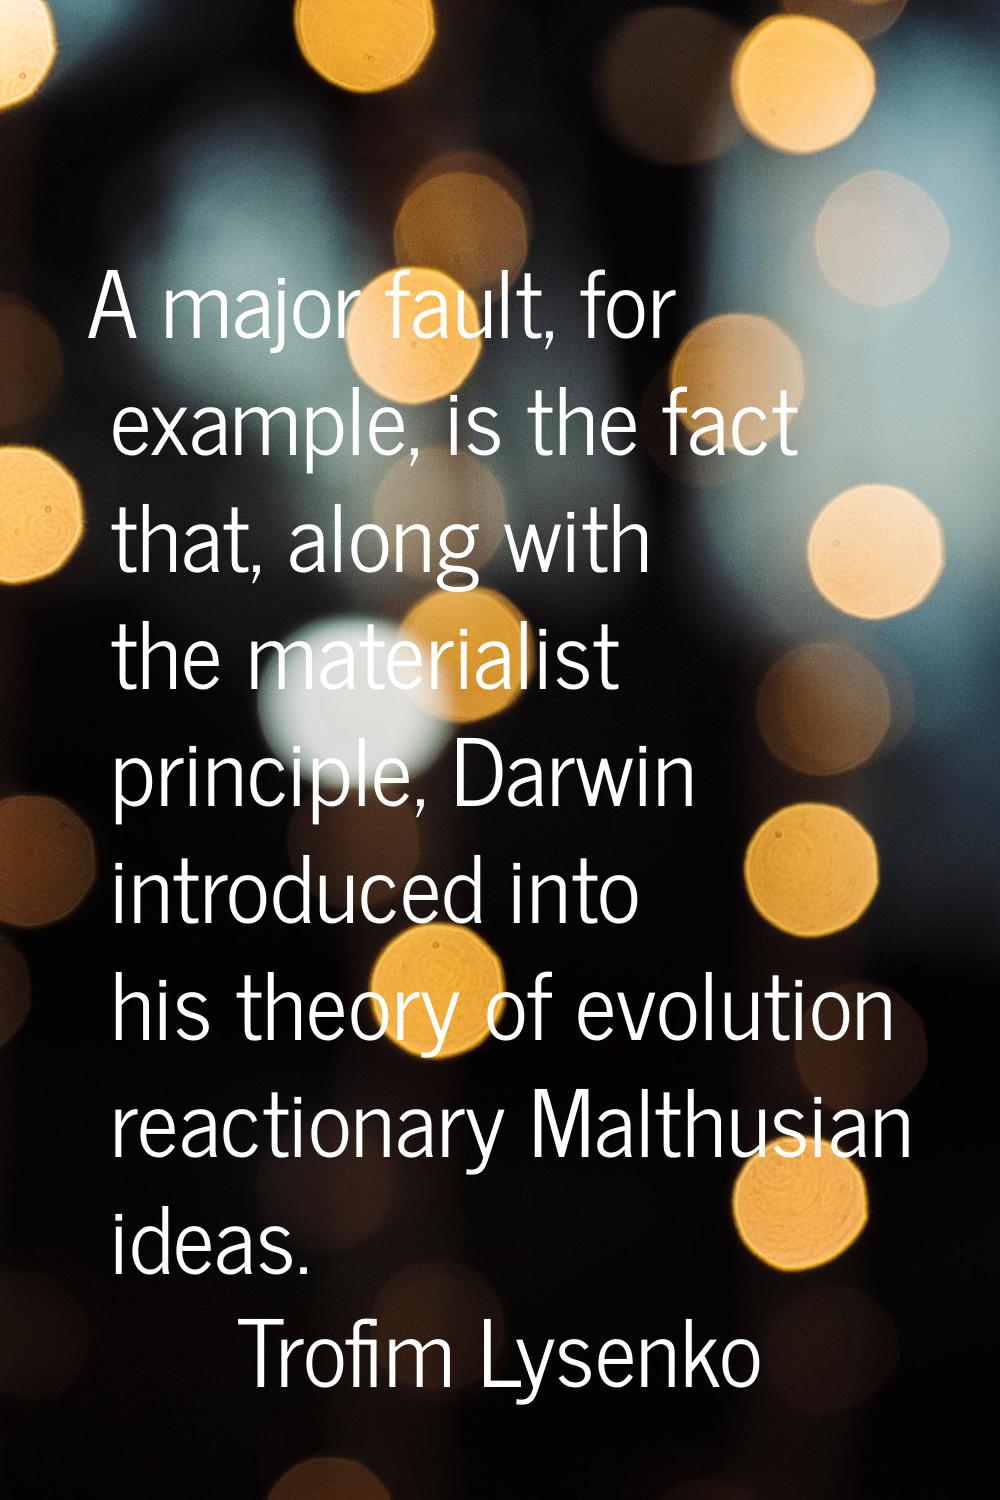 A major fault, for example, is the fact that, along with the materialist principle, Darwin introduc